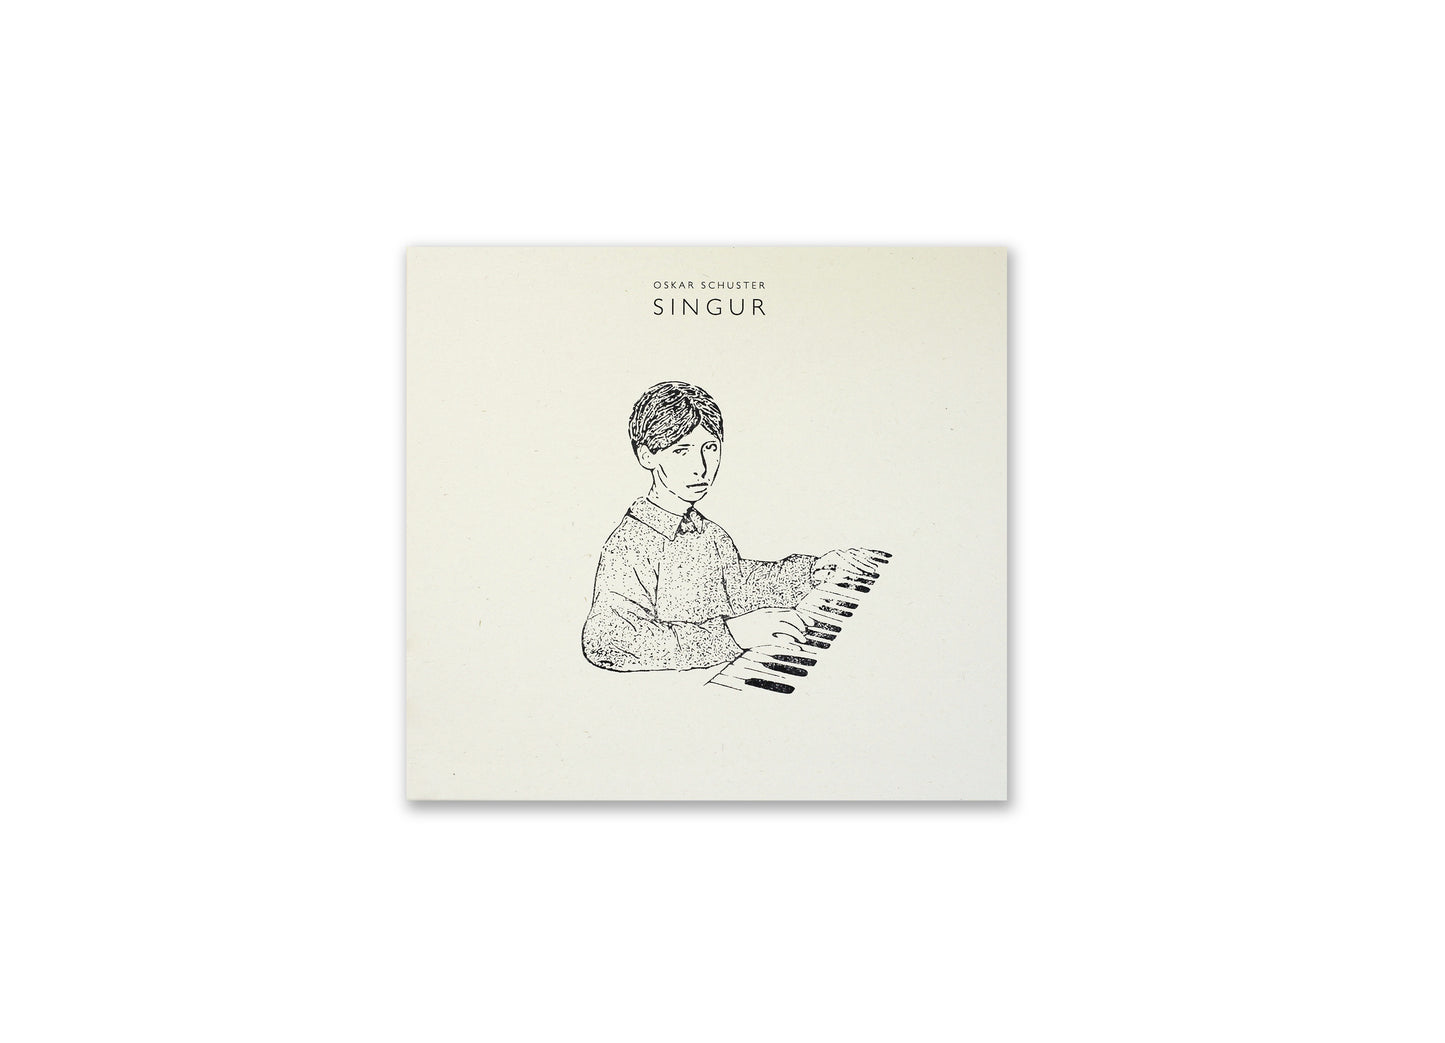 "Singur" CD edition with hand-stamped artwork